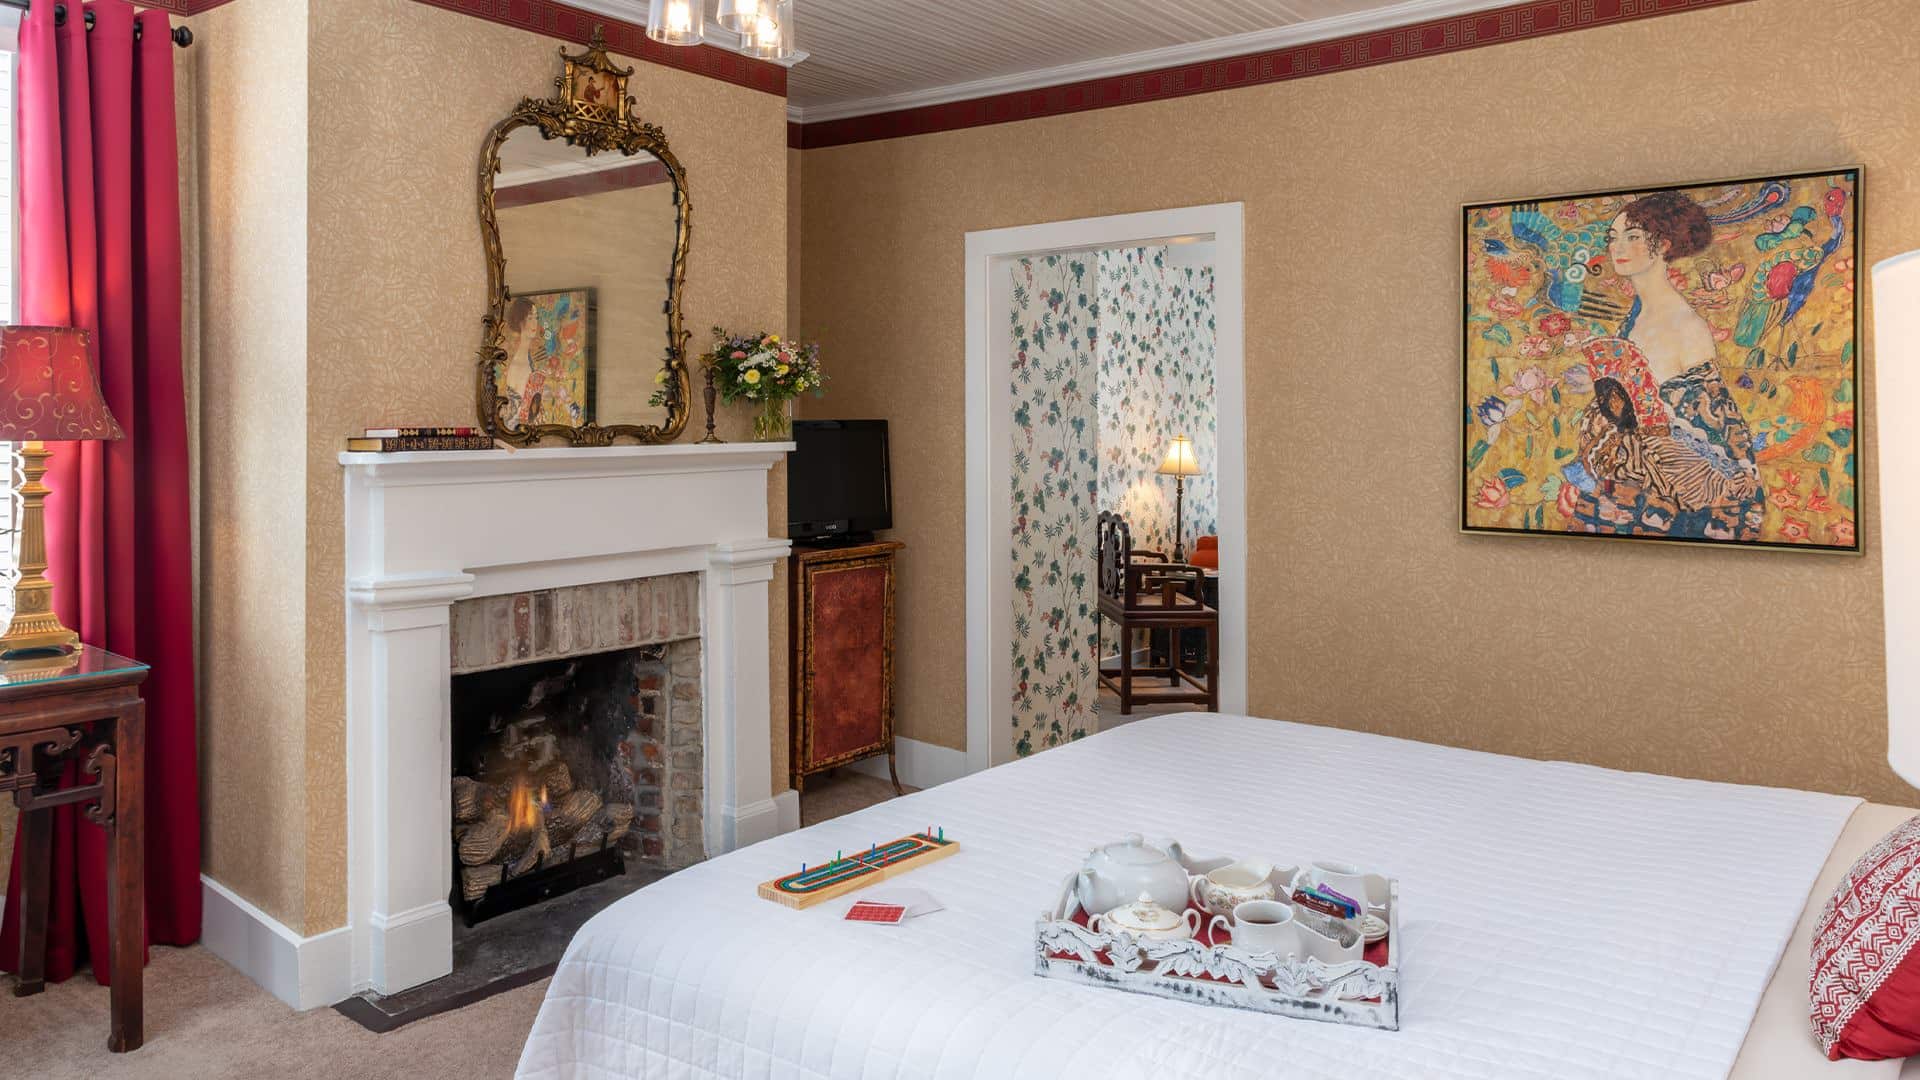 Bedroom with wallpaper, white bedding, fireplace with white mantel, and ornate mirror